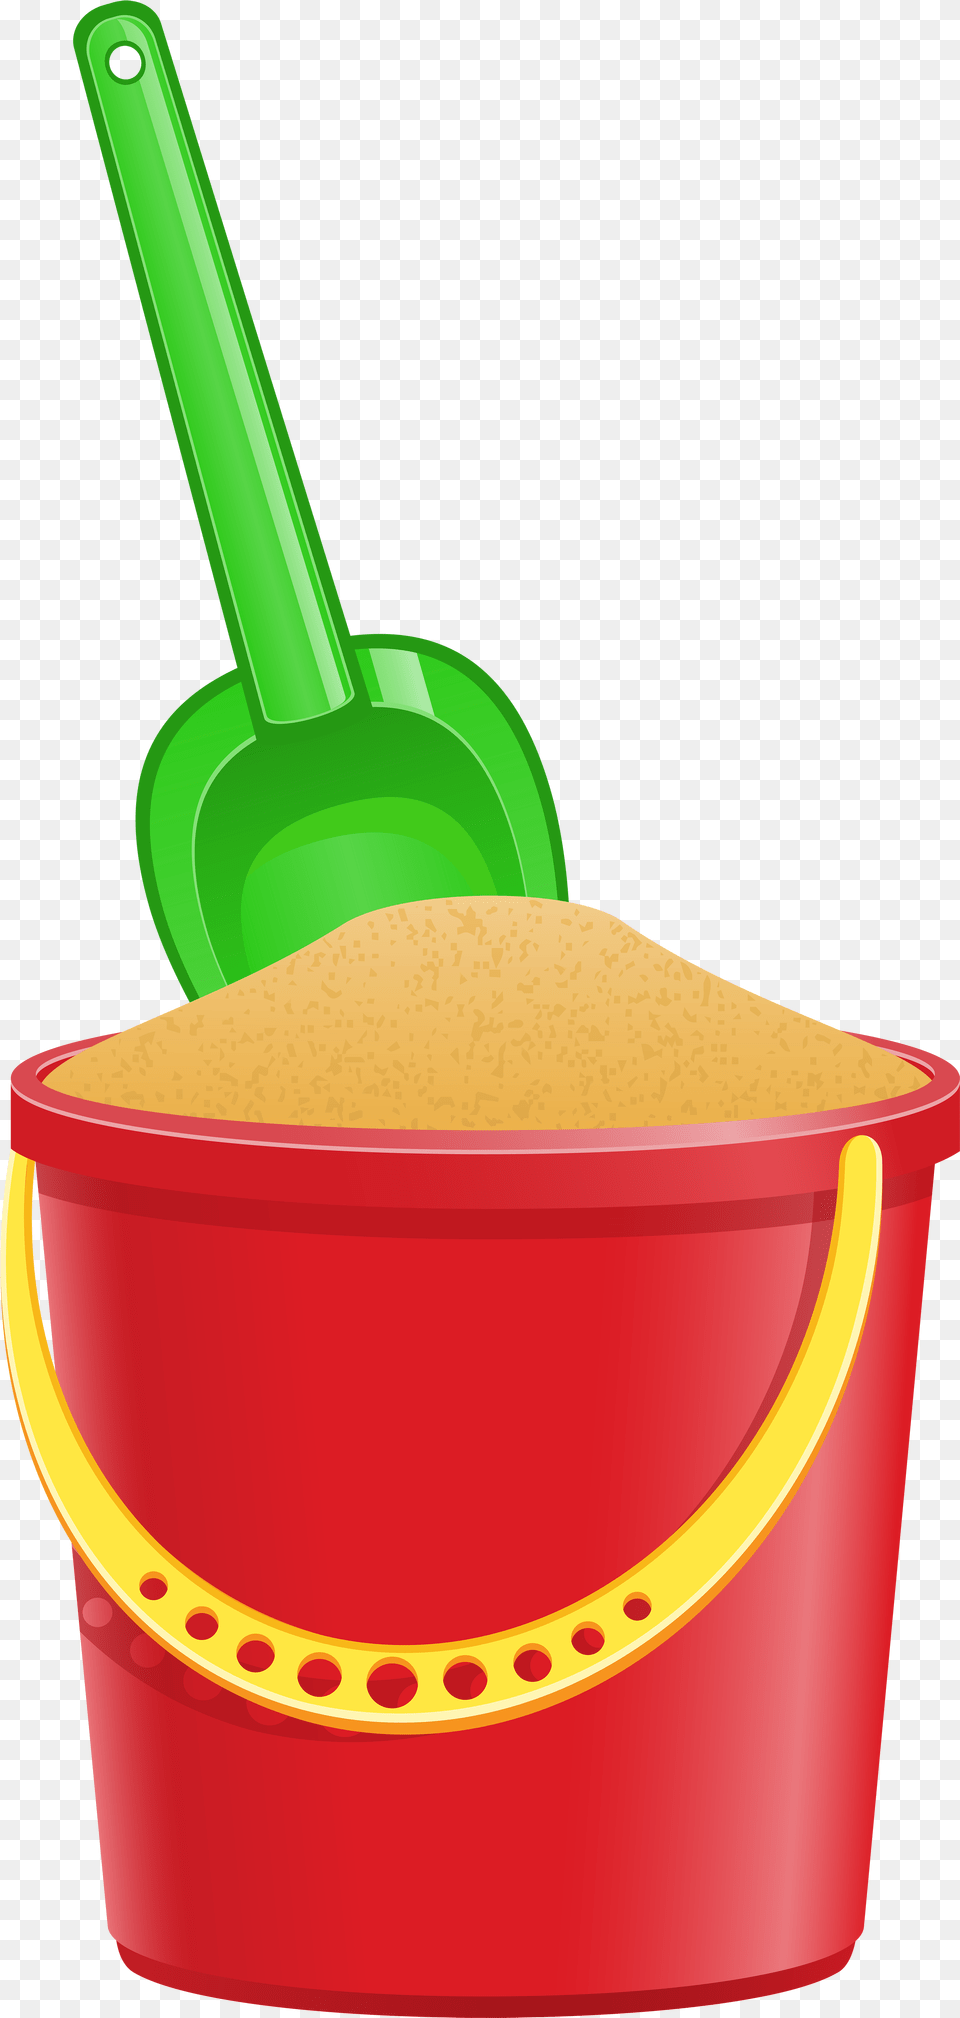 Download Shovel And Bucket Bucket And Shovel, Cup Png